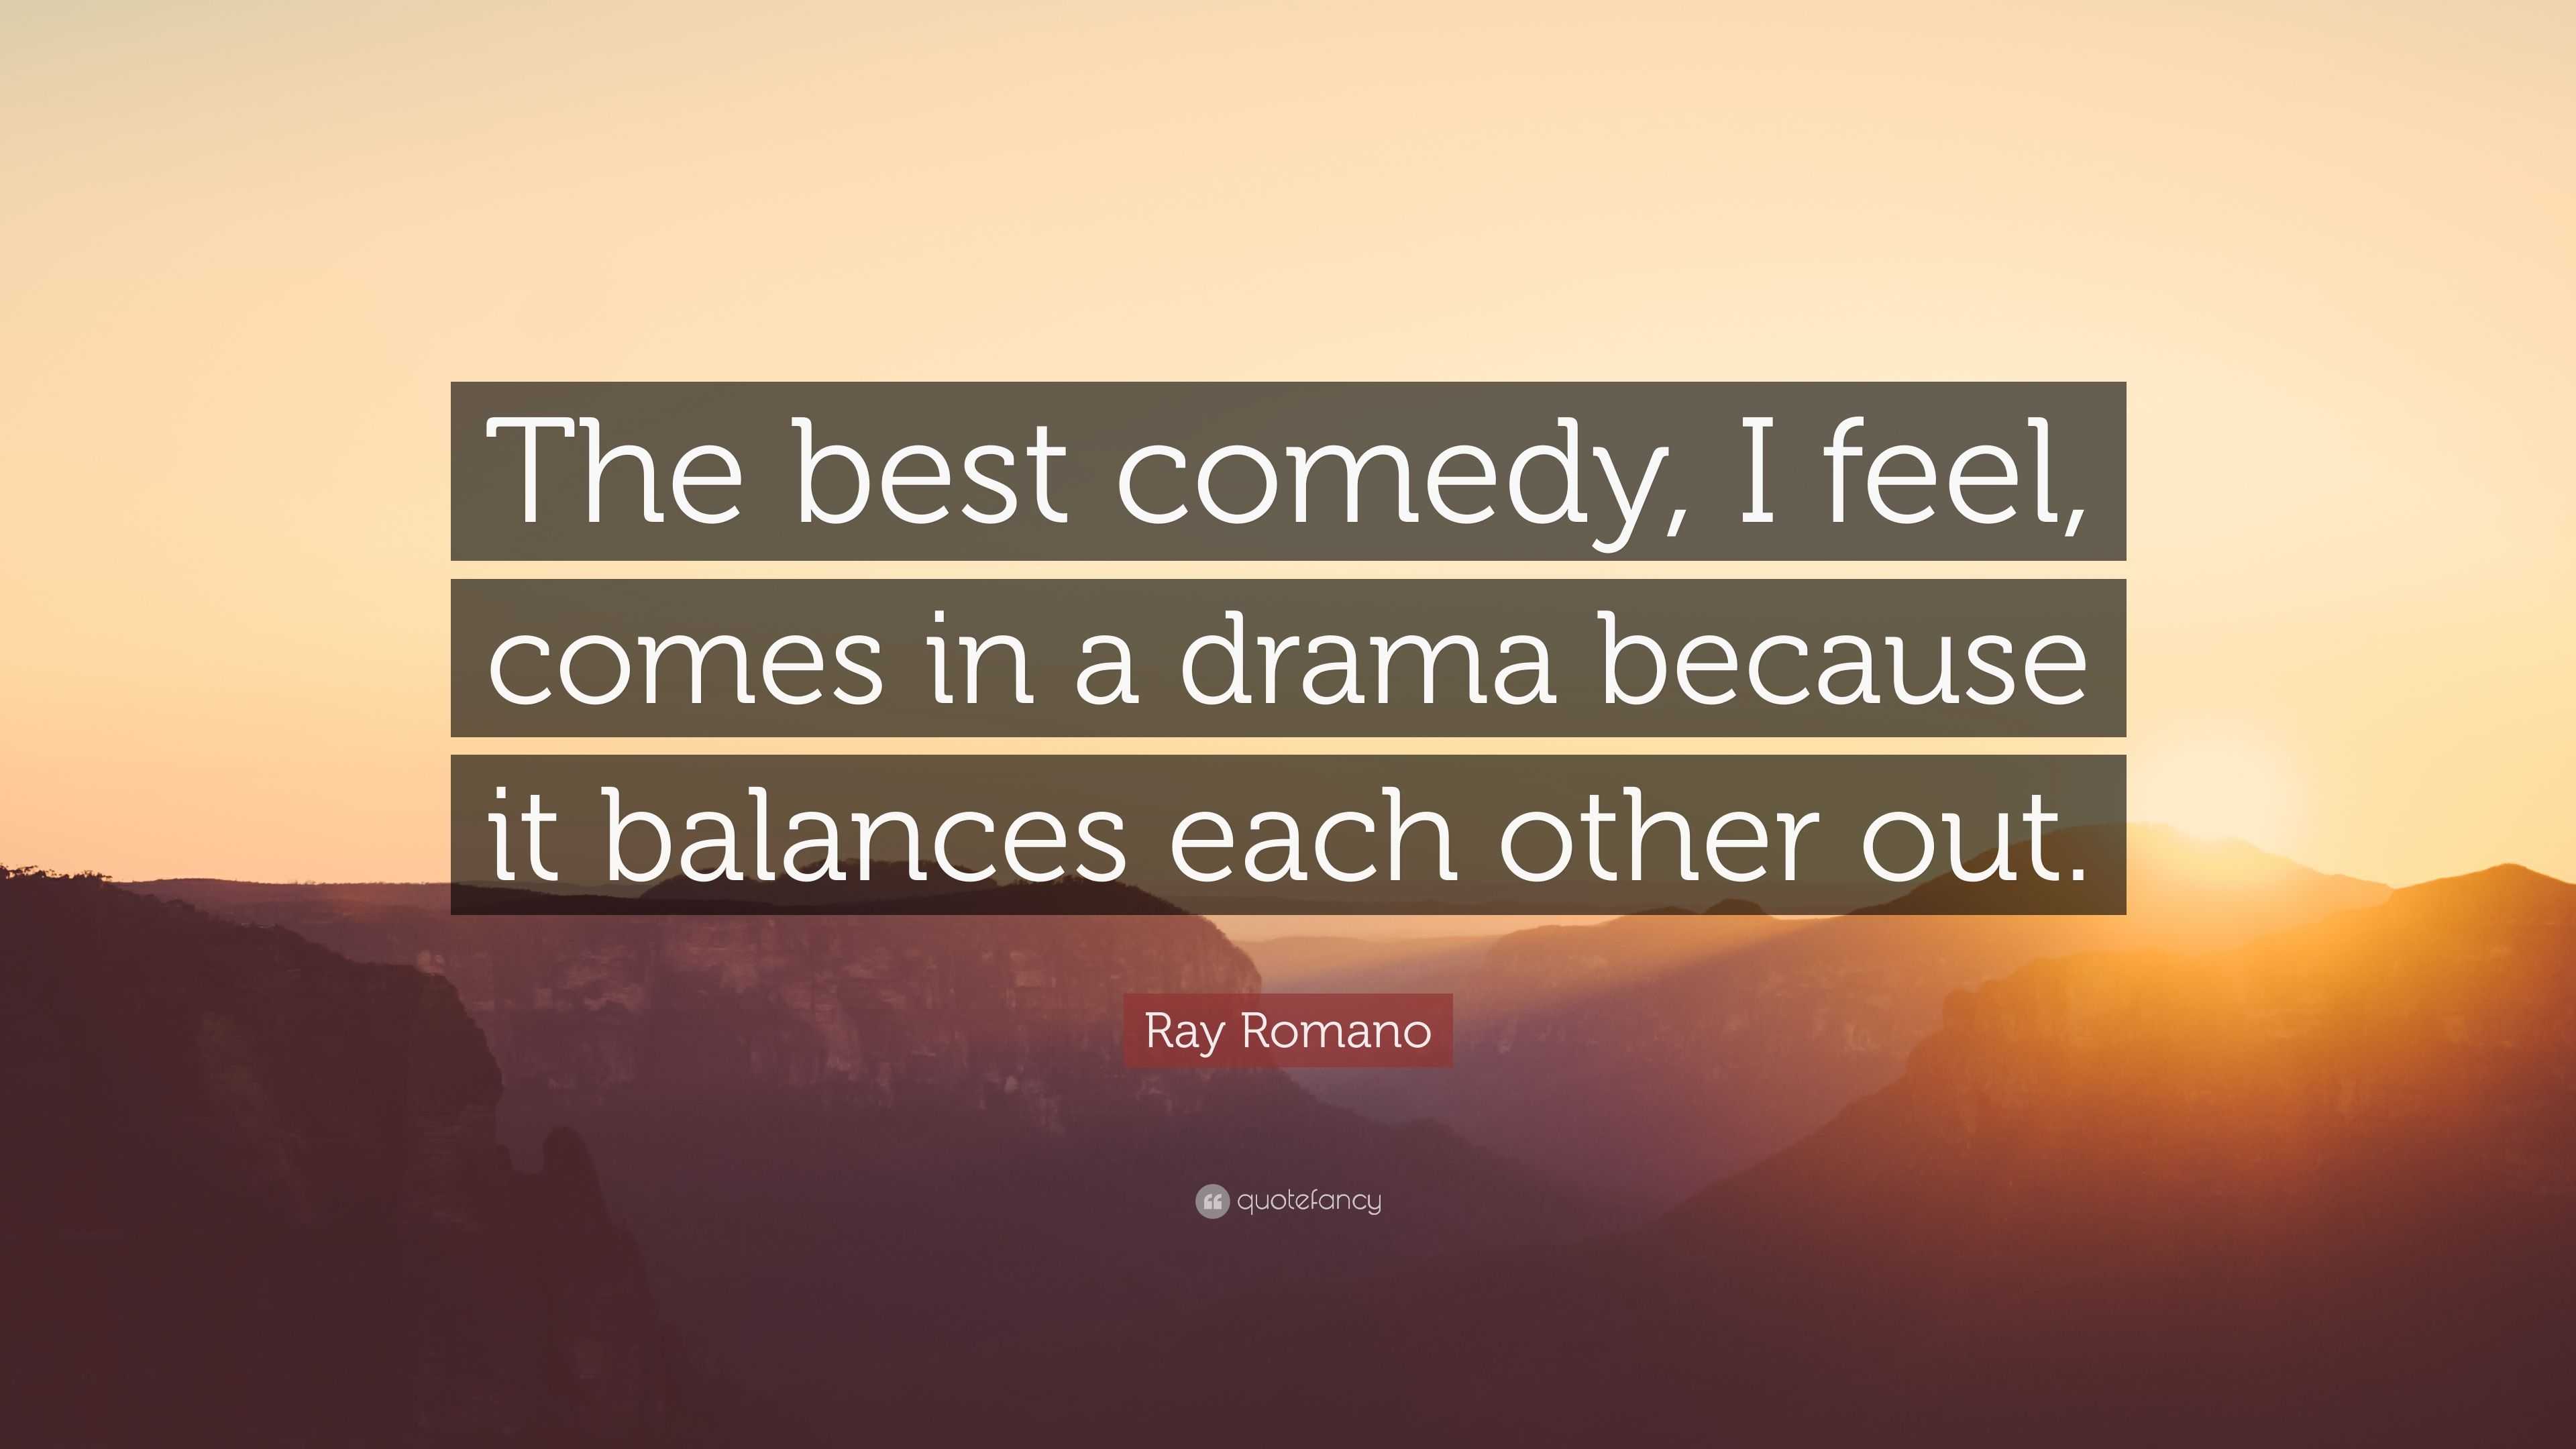 Ray Romano Quote: “The best comedy, I feel, comes in a drama because it  balances each